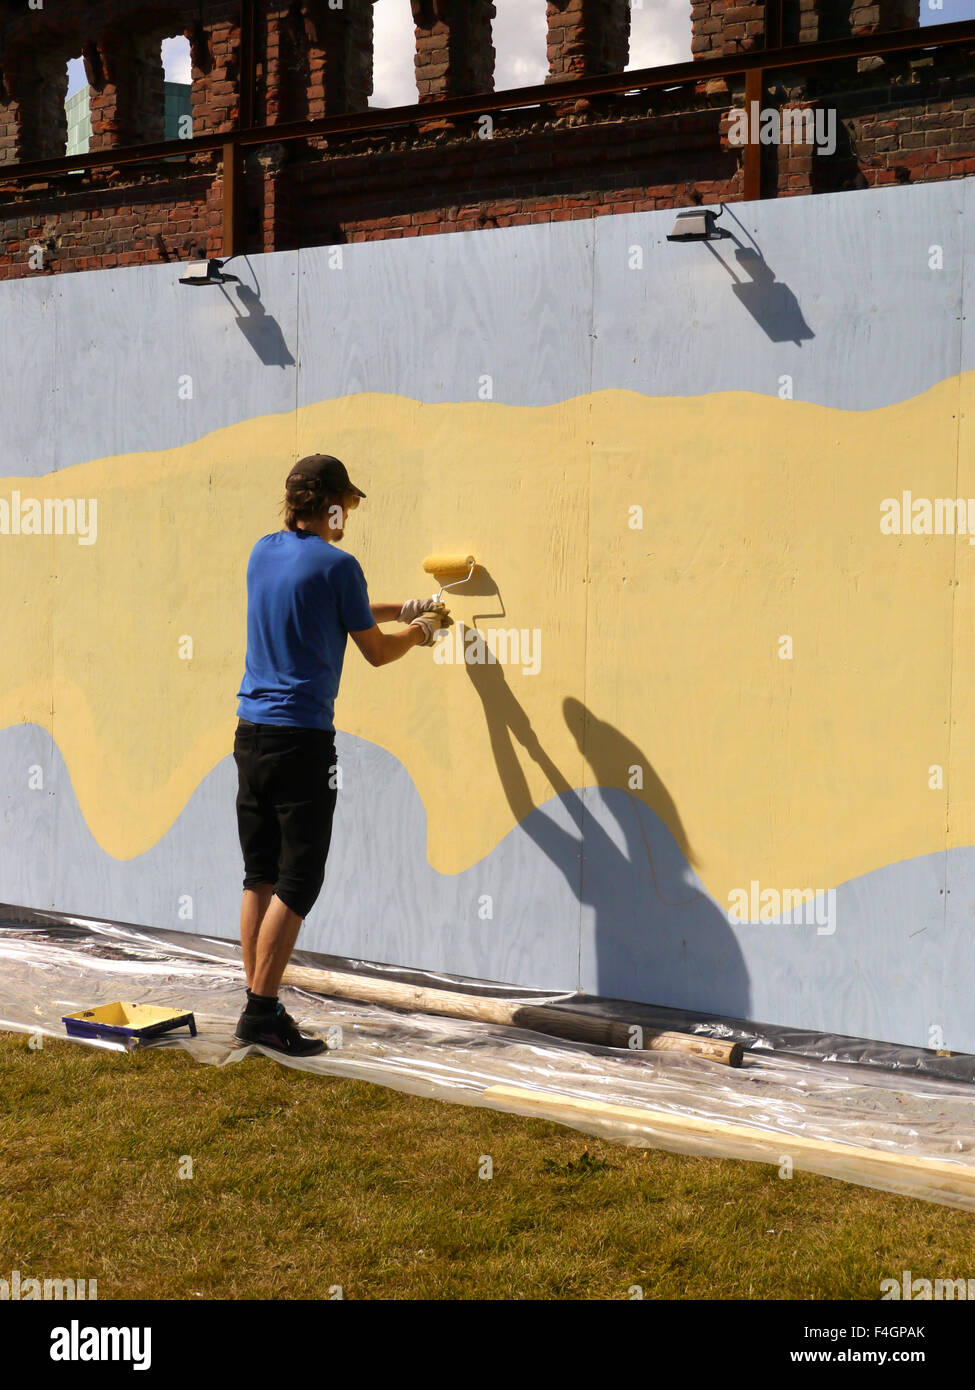 A man paining a hoarding outside with a paint roller on a sunny day Stock Photo